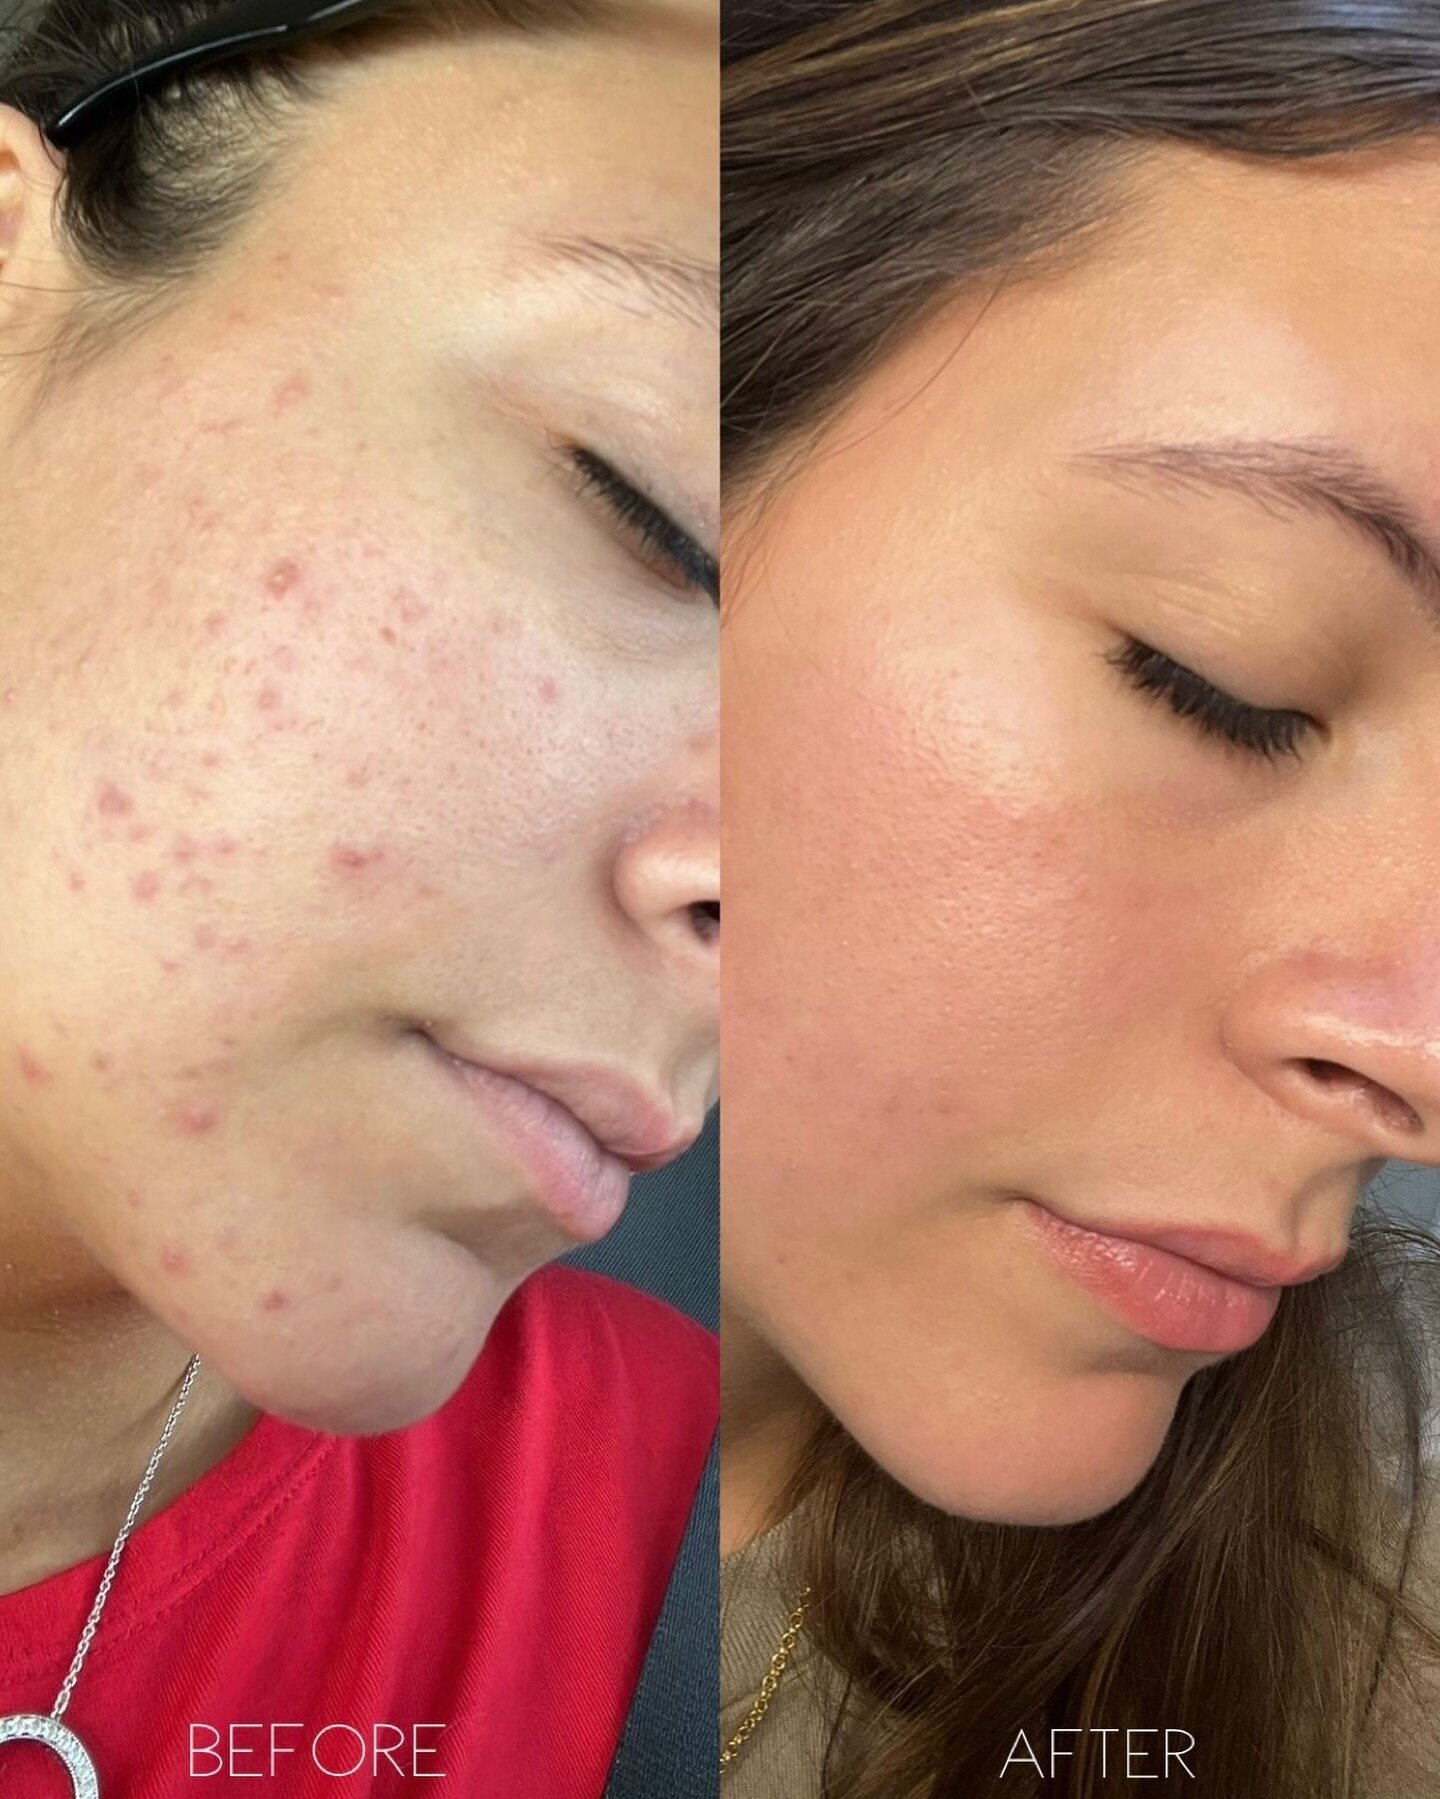 Results like this make my job so worth it❣️

Don&rsquo;t wait to take care of your acne, start your journey today 
#beforeandafter #beforeandafteracne #skincare #skin #facials #facialsnearme #fortlauderdalefacials #lighthousepointfacials #facialnearm